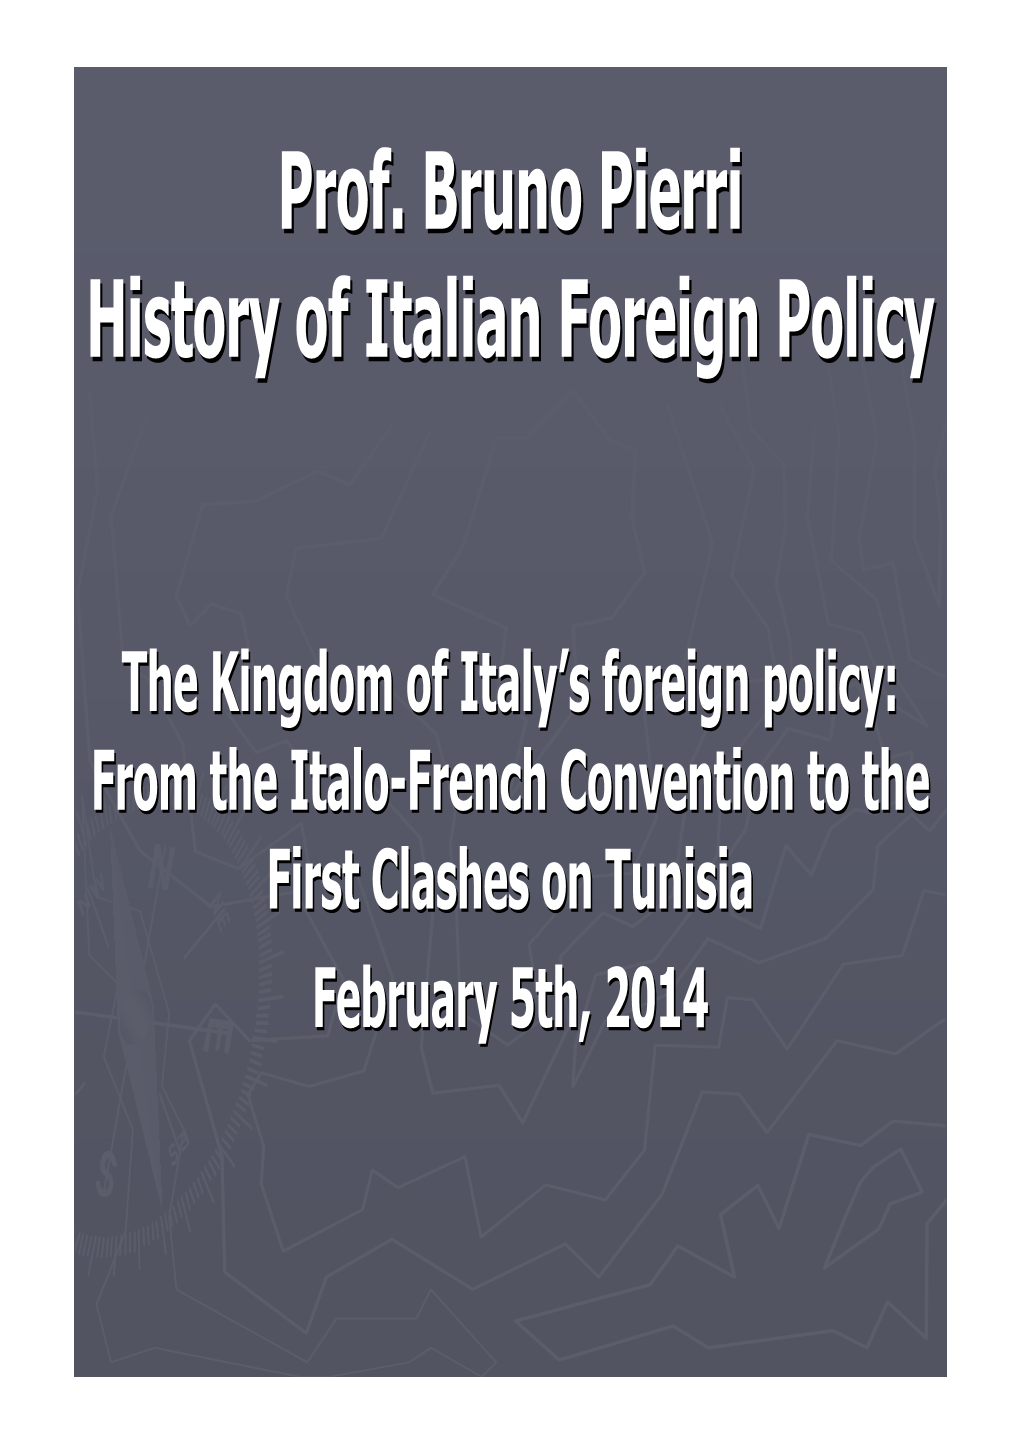 From the Italo-French Convention to the First Clashes on Tunisia